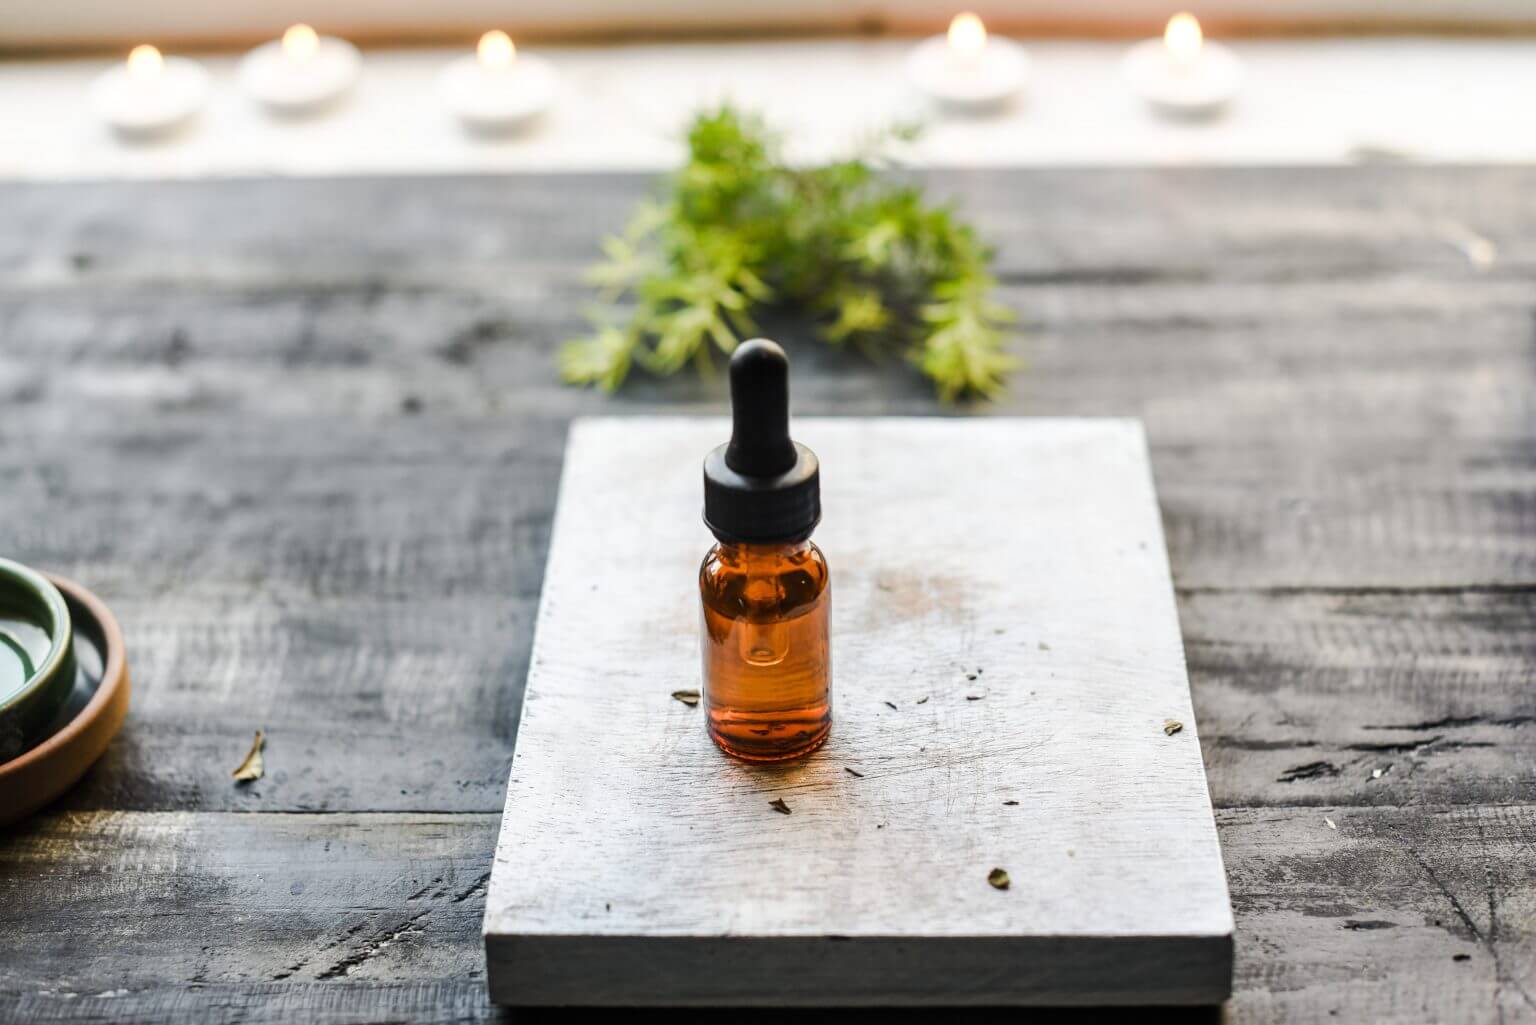 Is Cbd Serum Good For Your Skin?